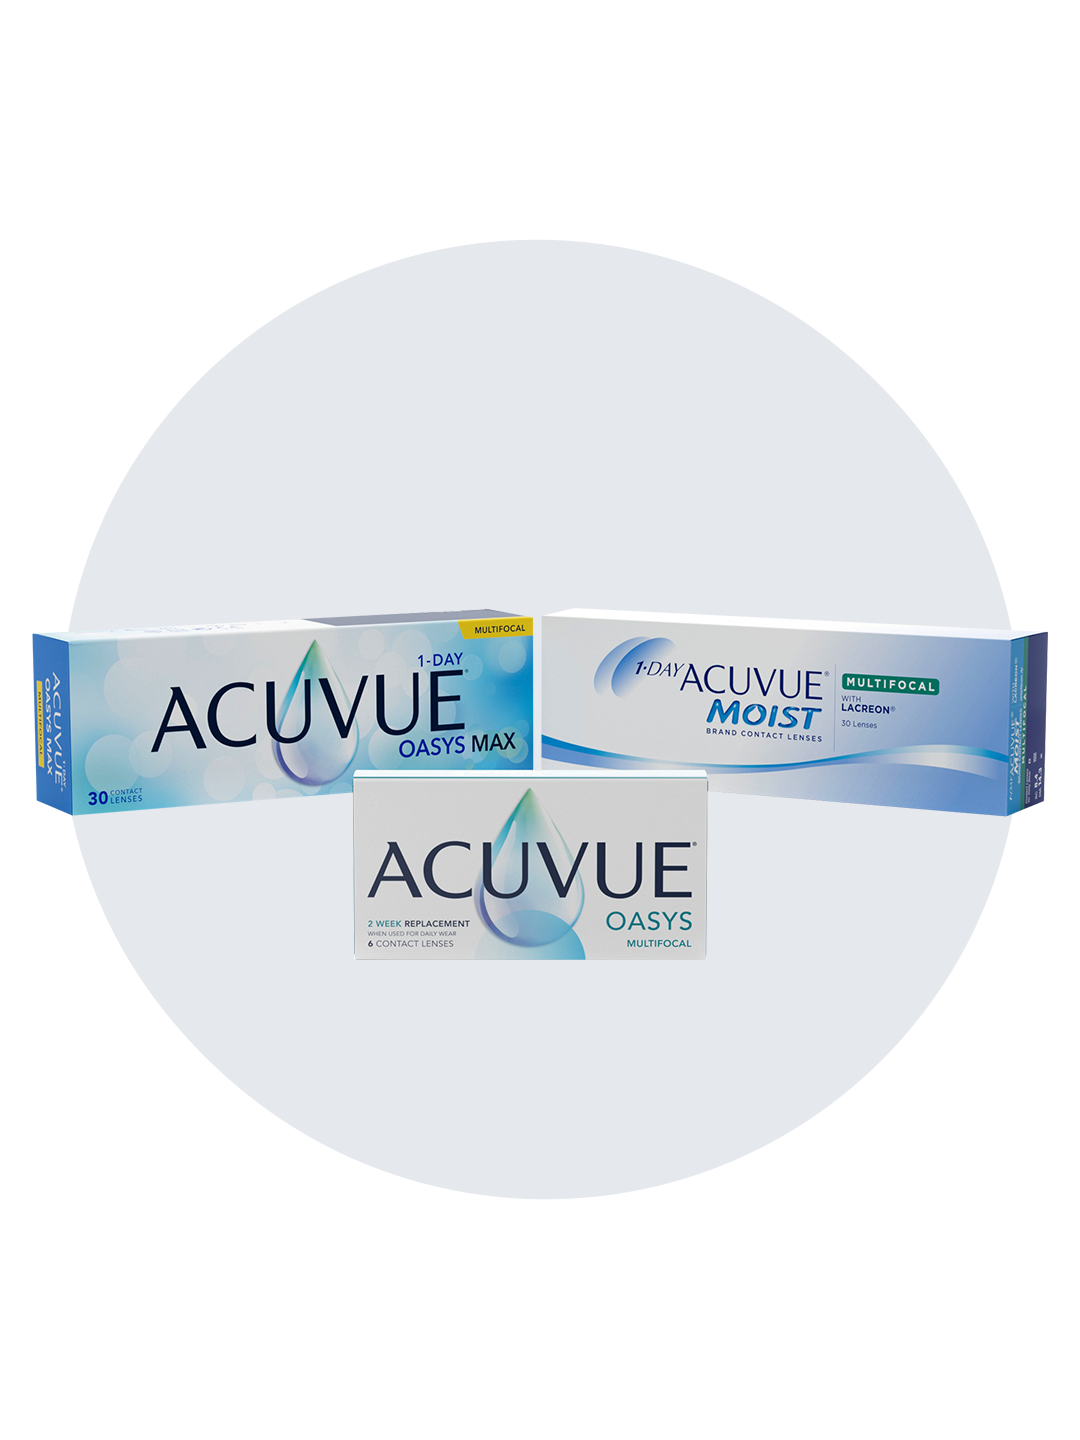 Three ACUVUE contact lens boxes.